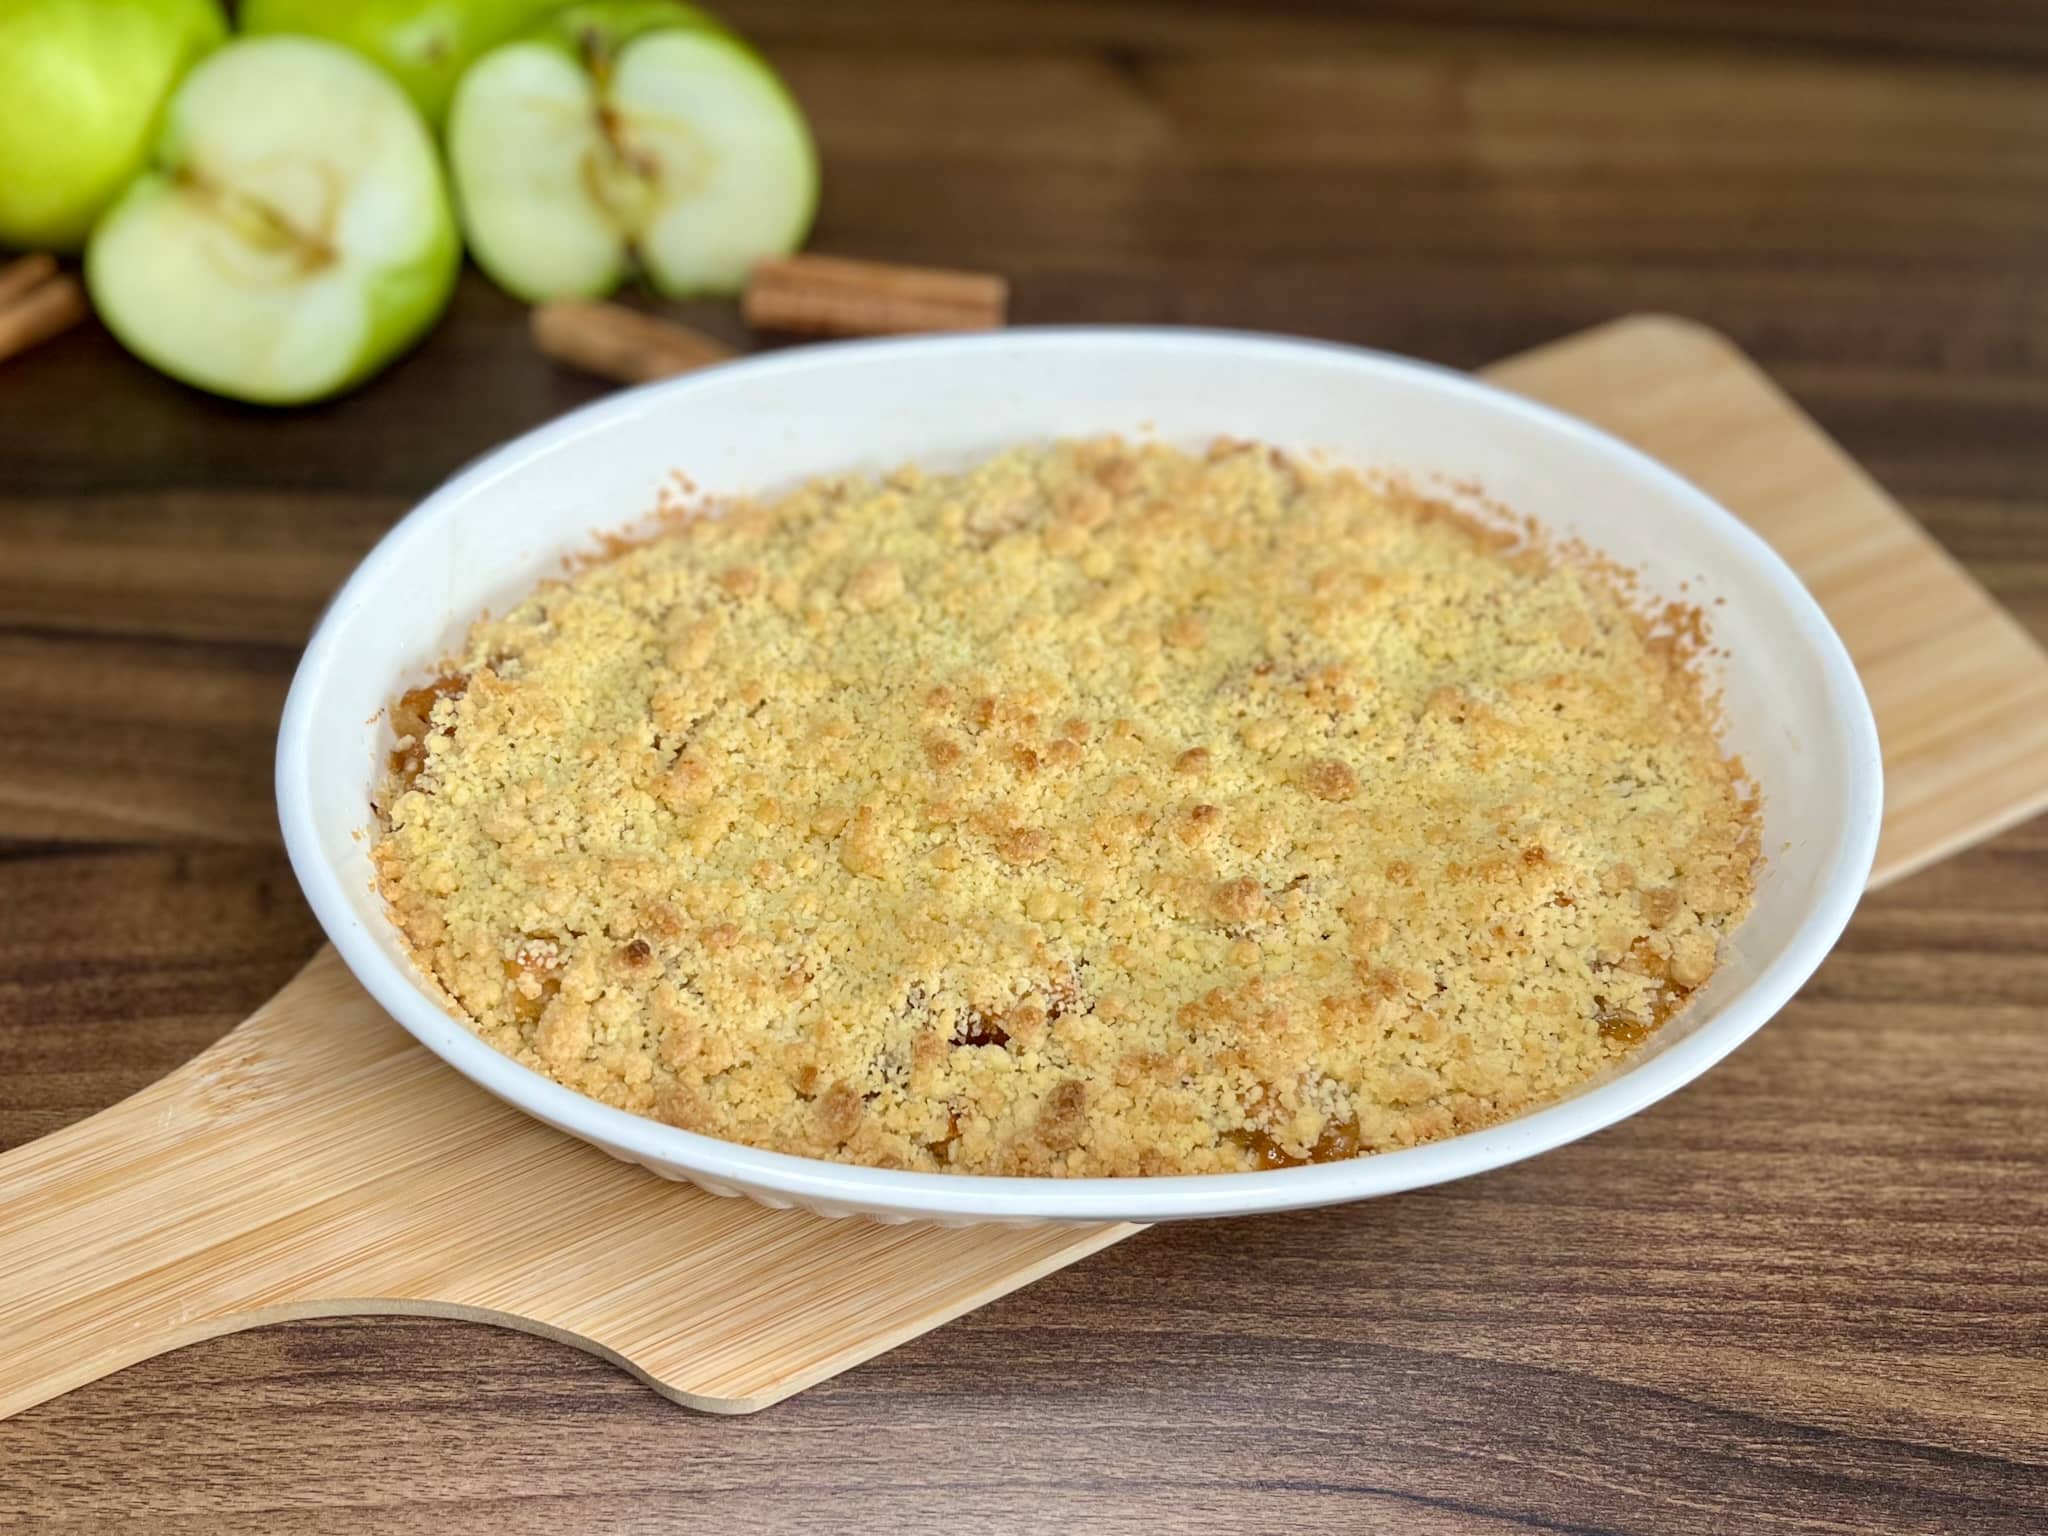 Nicely baked Apple Crumble in a baking dish